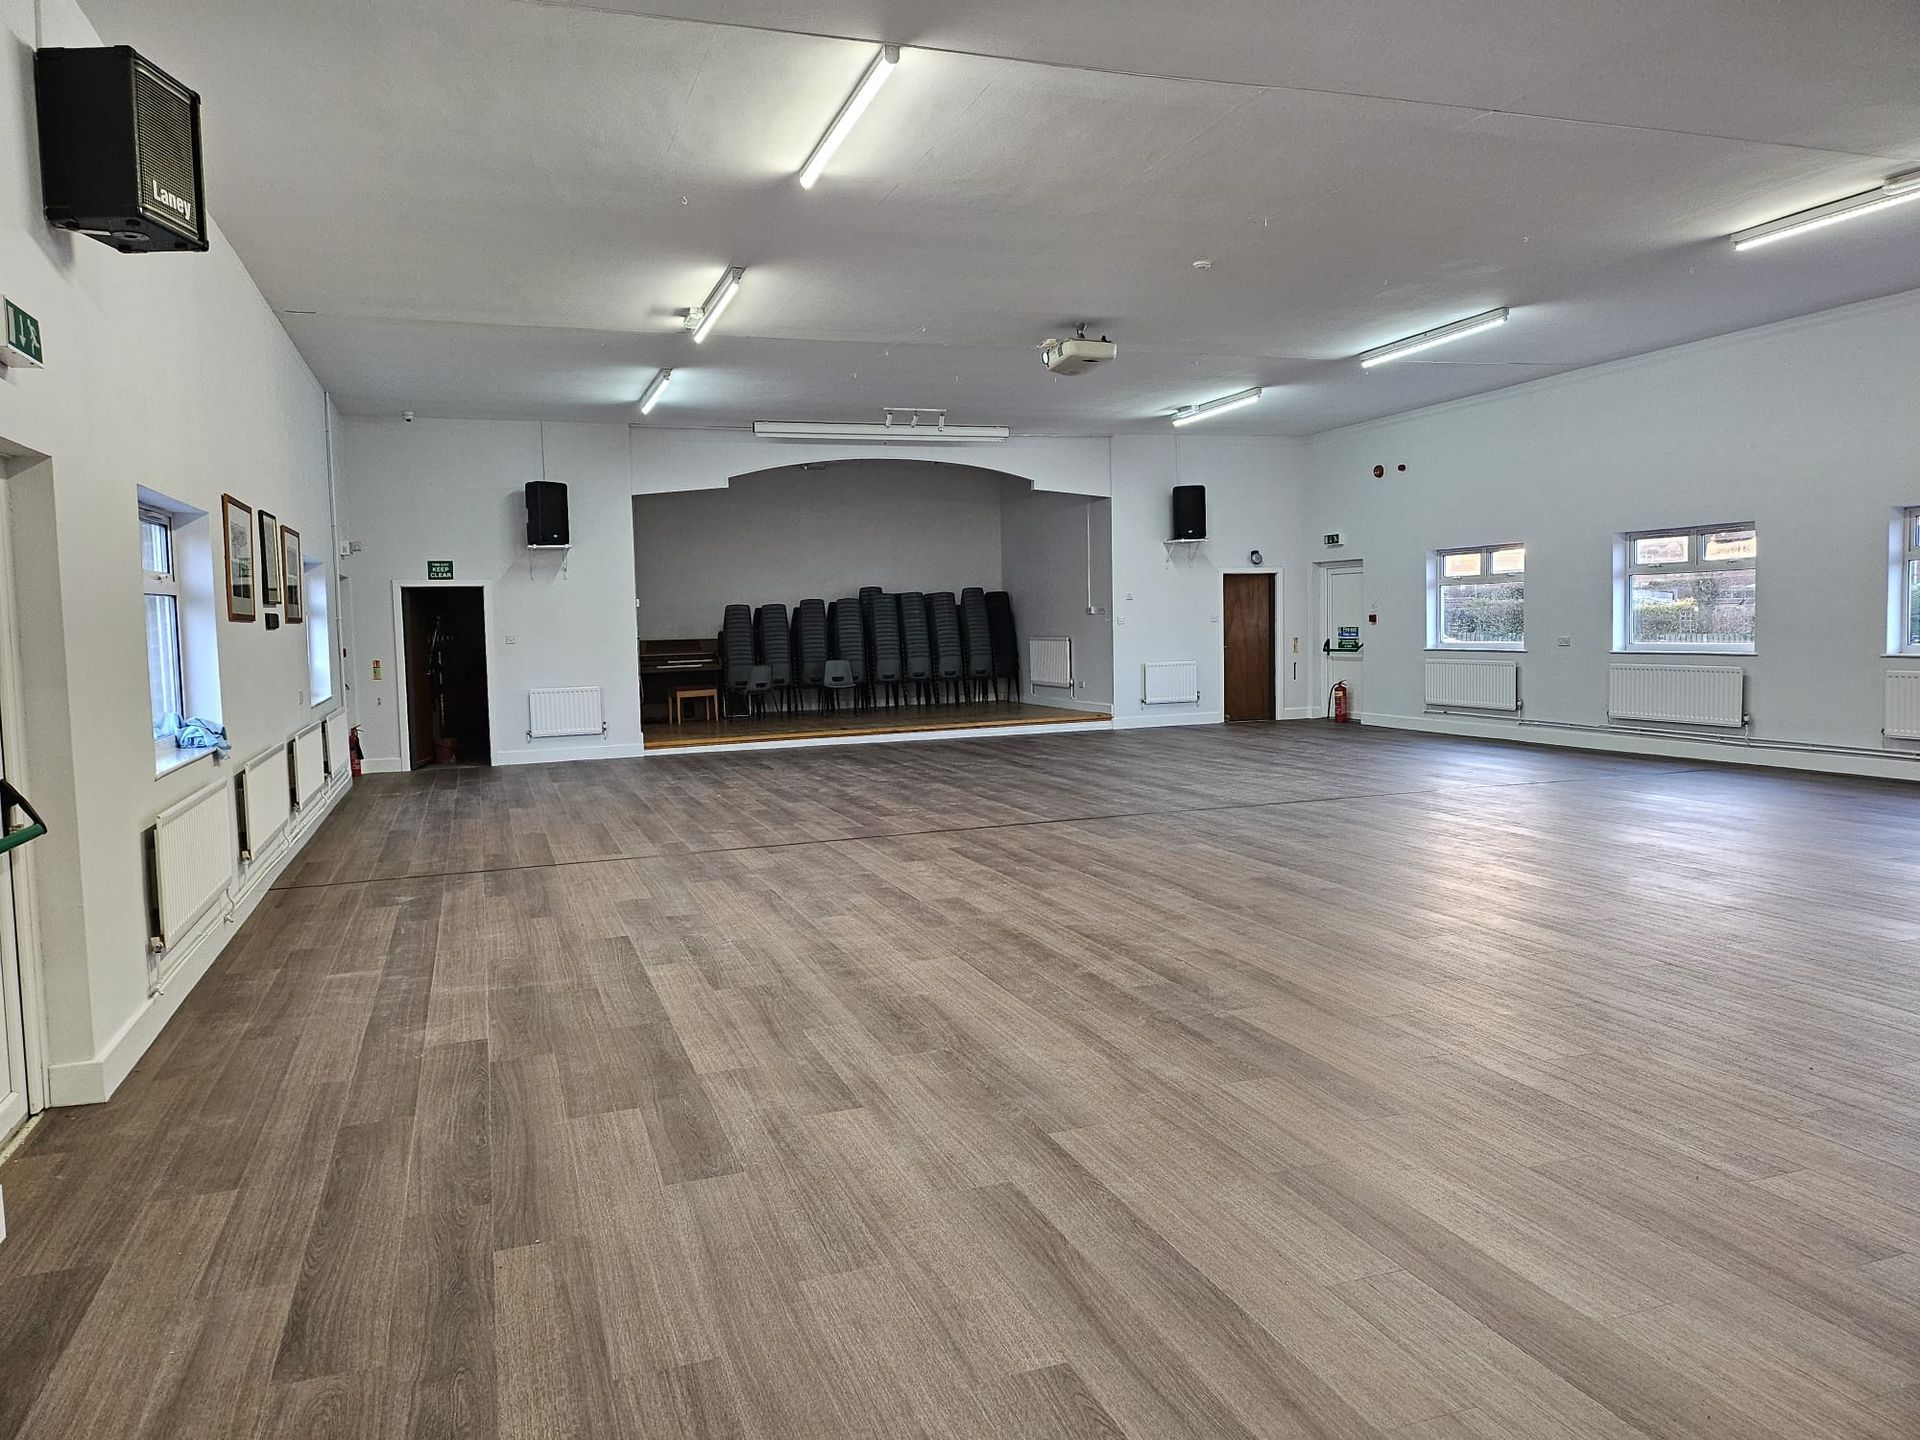 Image of the new floor at Newton Community Centre